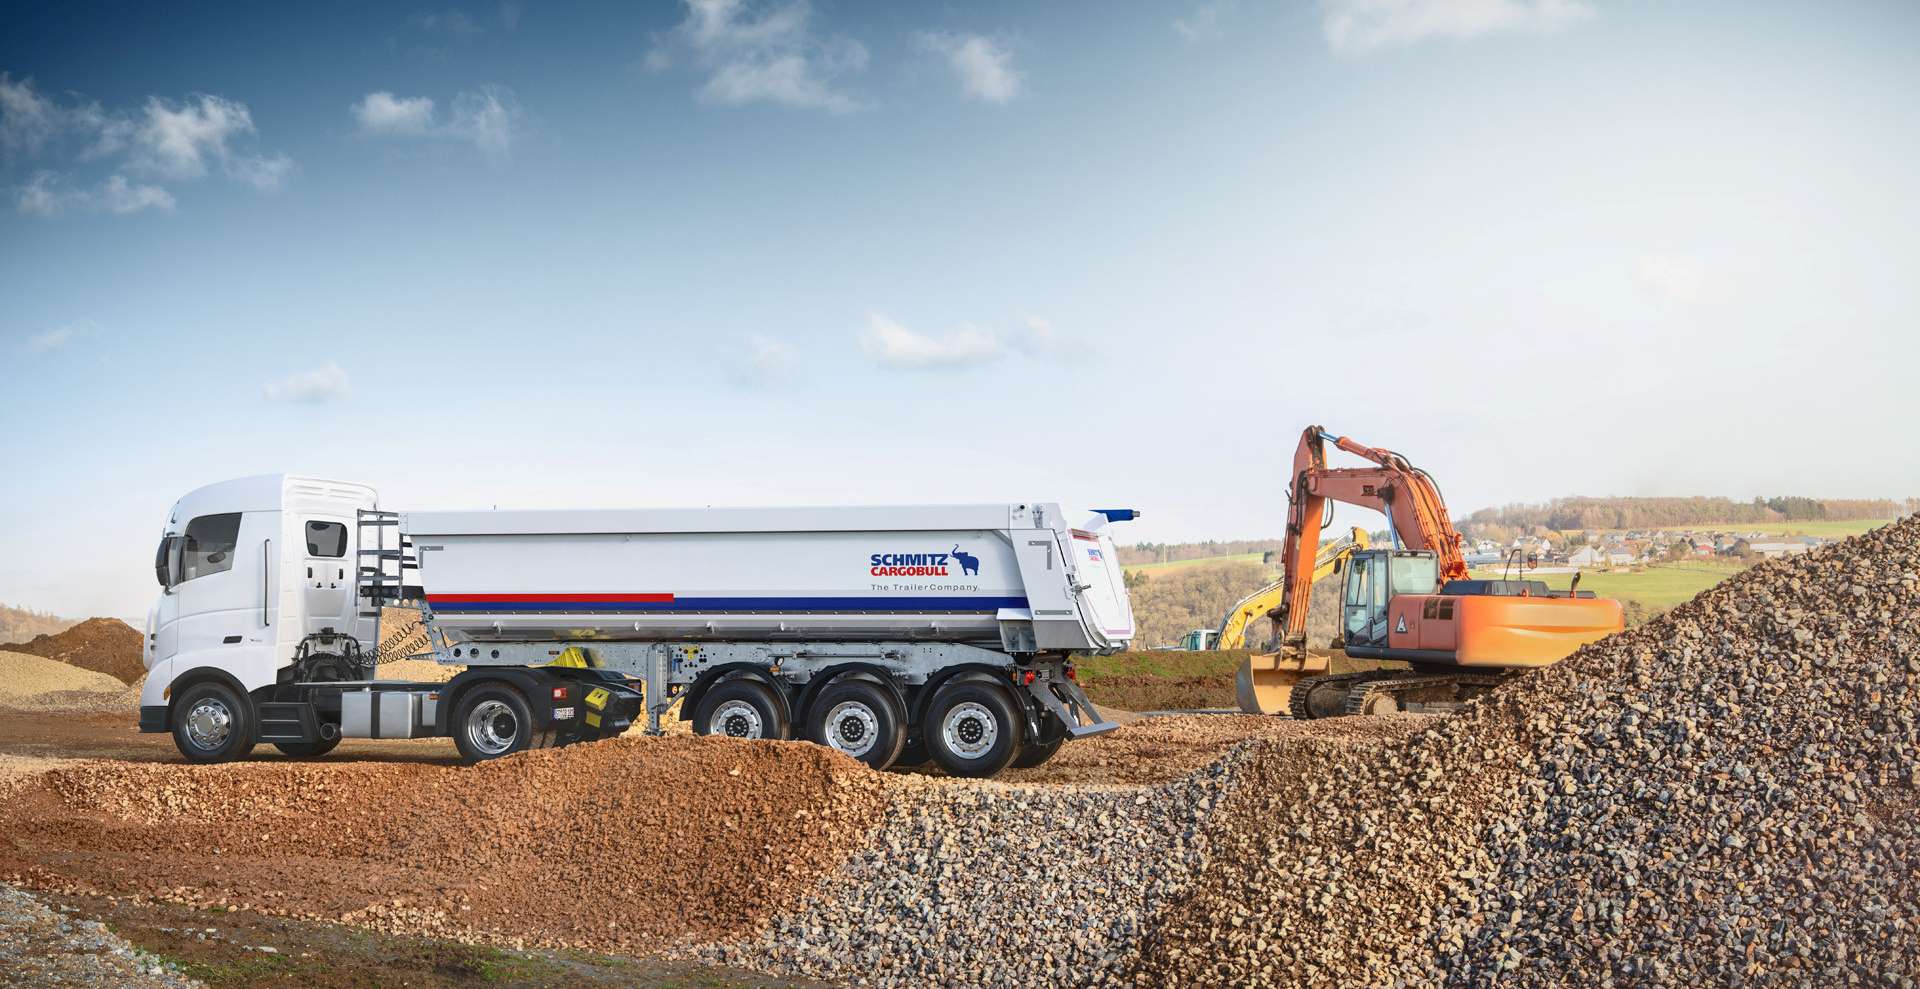 The tough solution in construction site transport - the S.KI SOLID tipper semi-trailer with rounded steel body